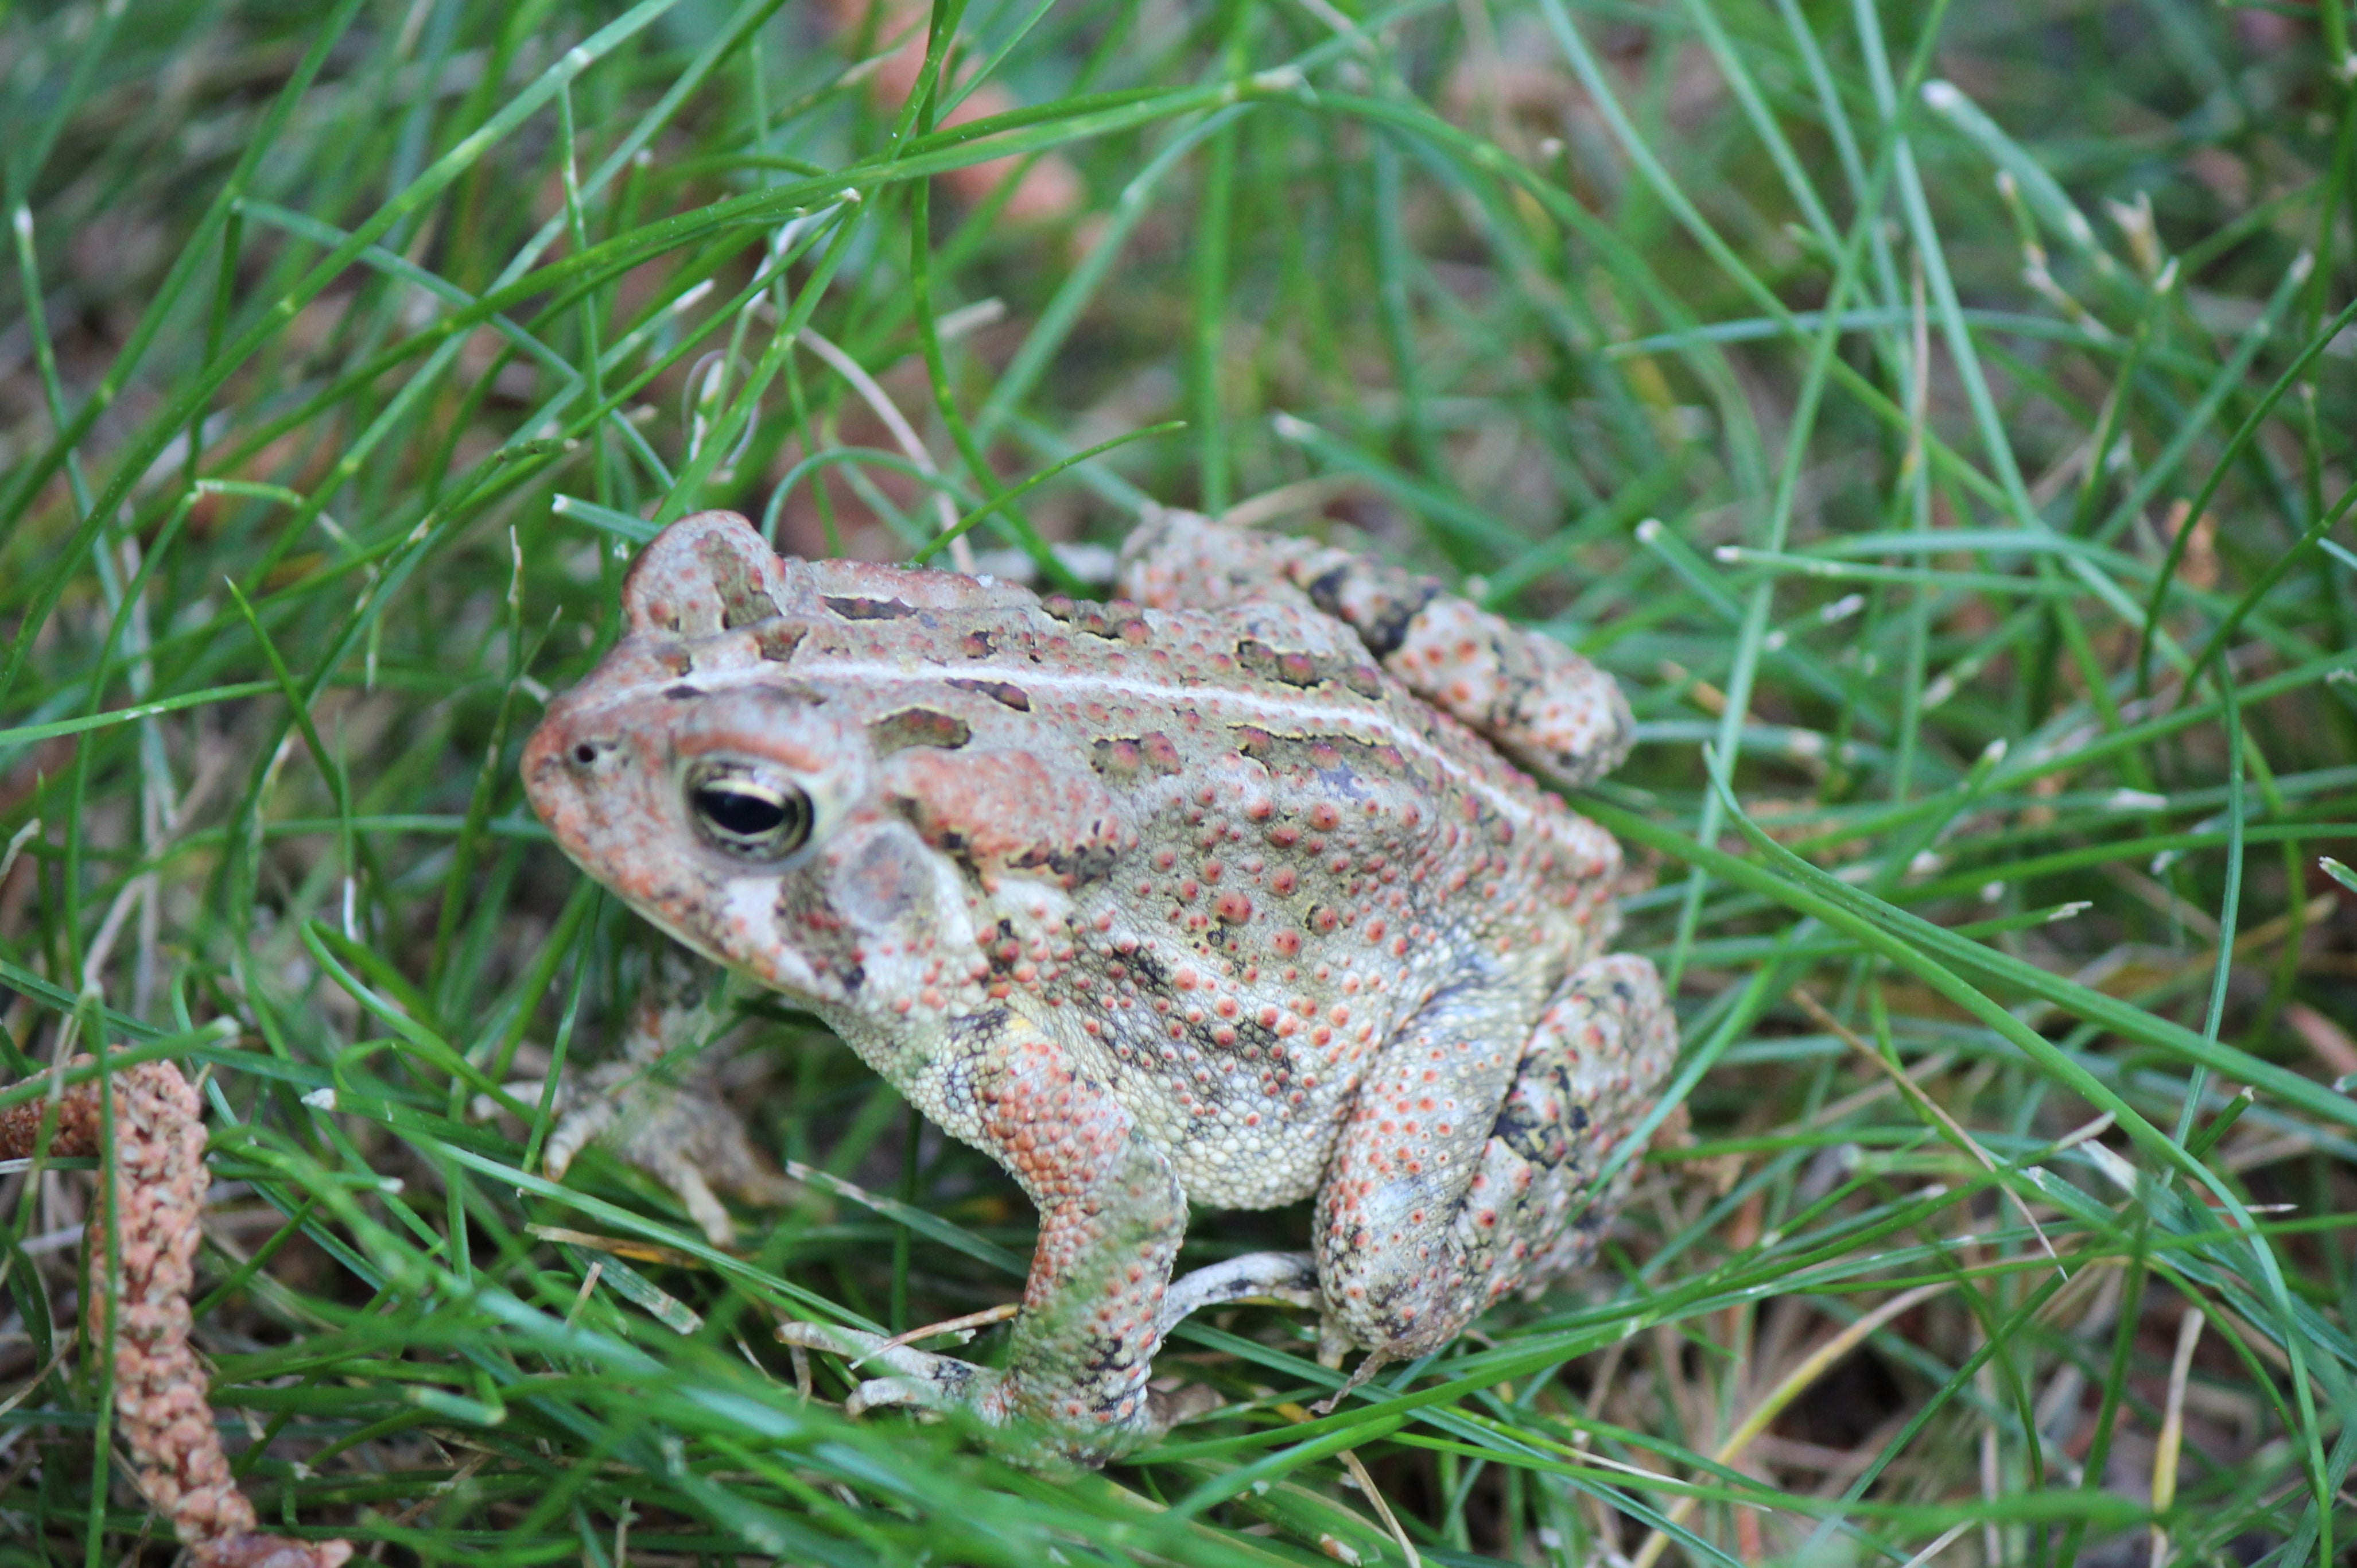 The American Toad: A Common and Widely Known Species in Alabama